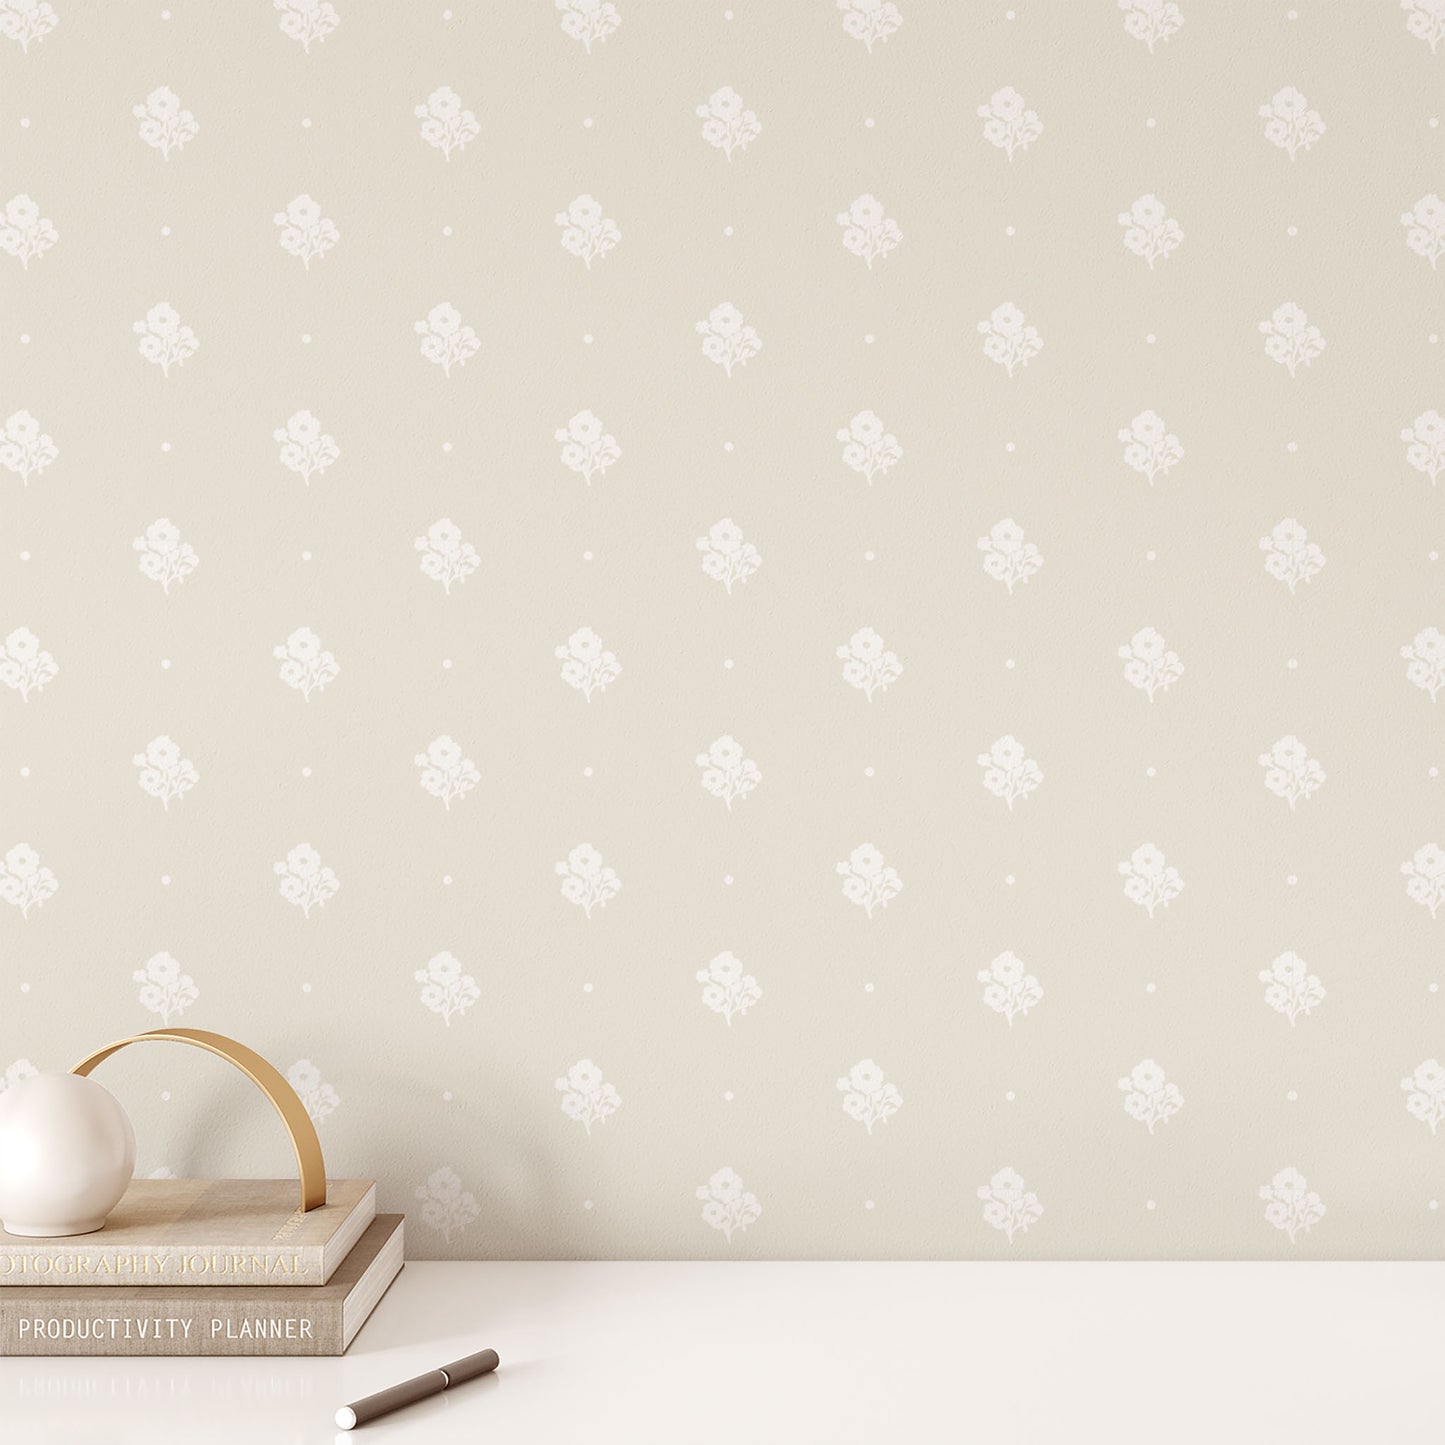 Elevate your home decor with our Cambridge Wallpaper in a sophisticated sand shown in a full size image.